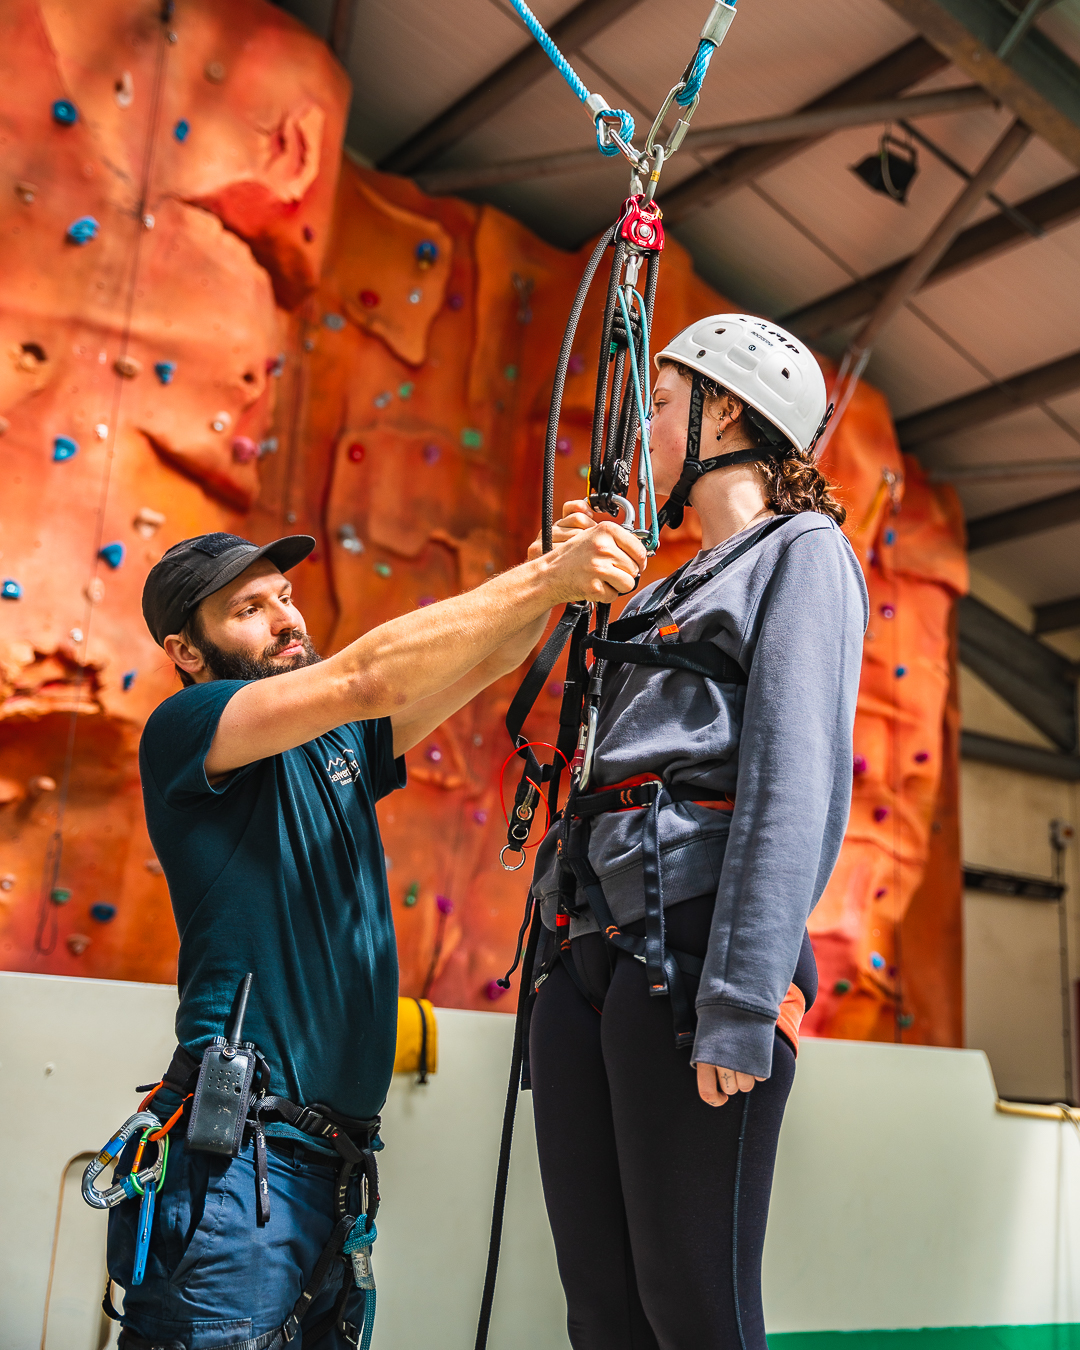 A guest standing in front of the indoor climbing wall with a white helmet and harness, while a member of Calvert Exmoor staff is attaching ropes and carabiners to her harness ready for the Giant Swing activity.